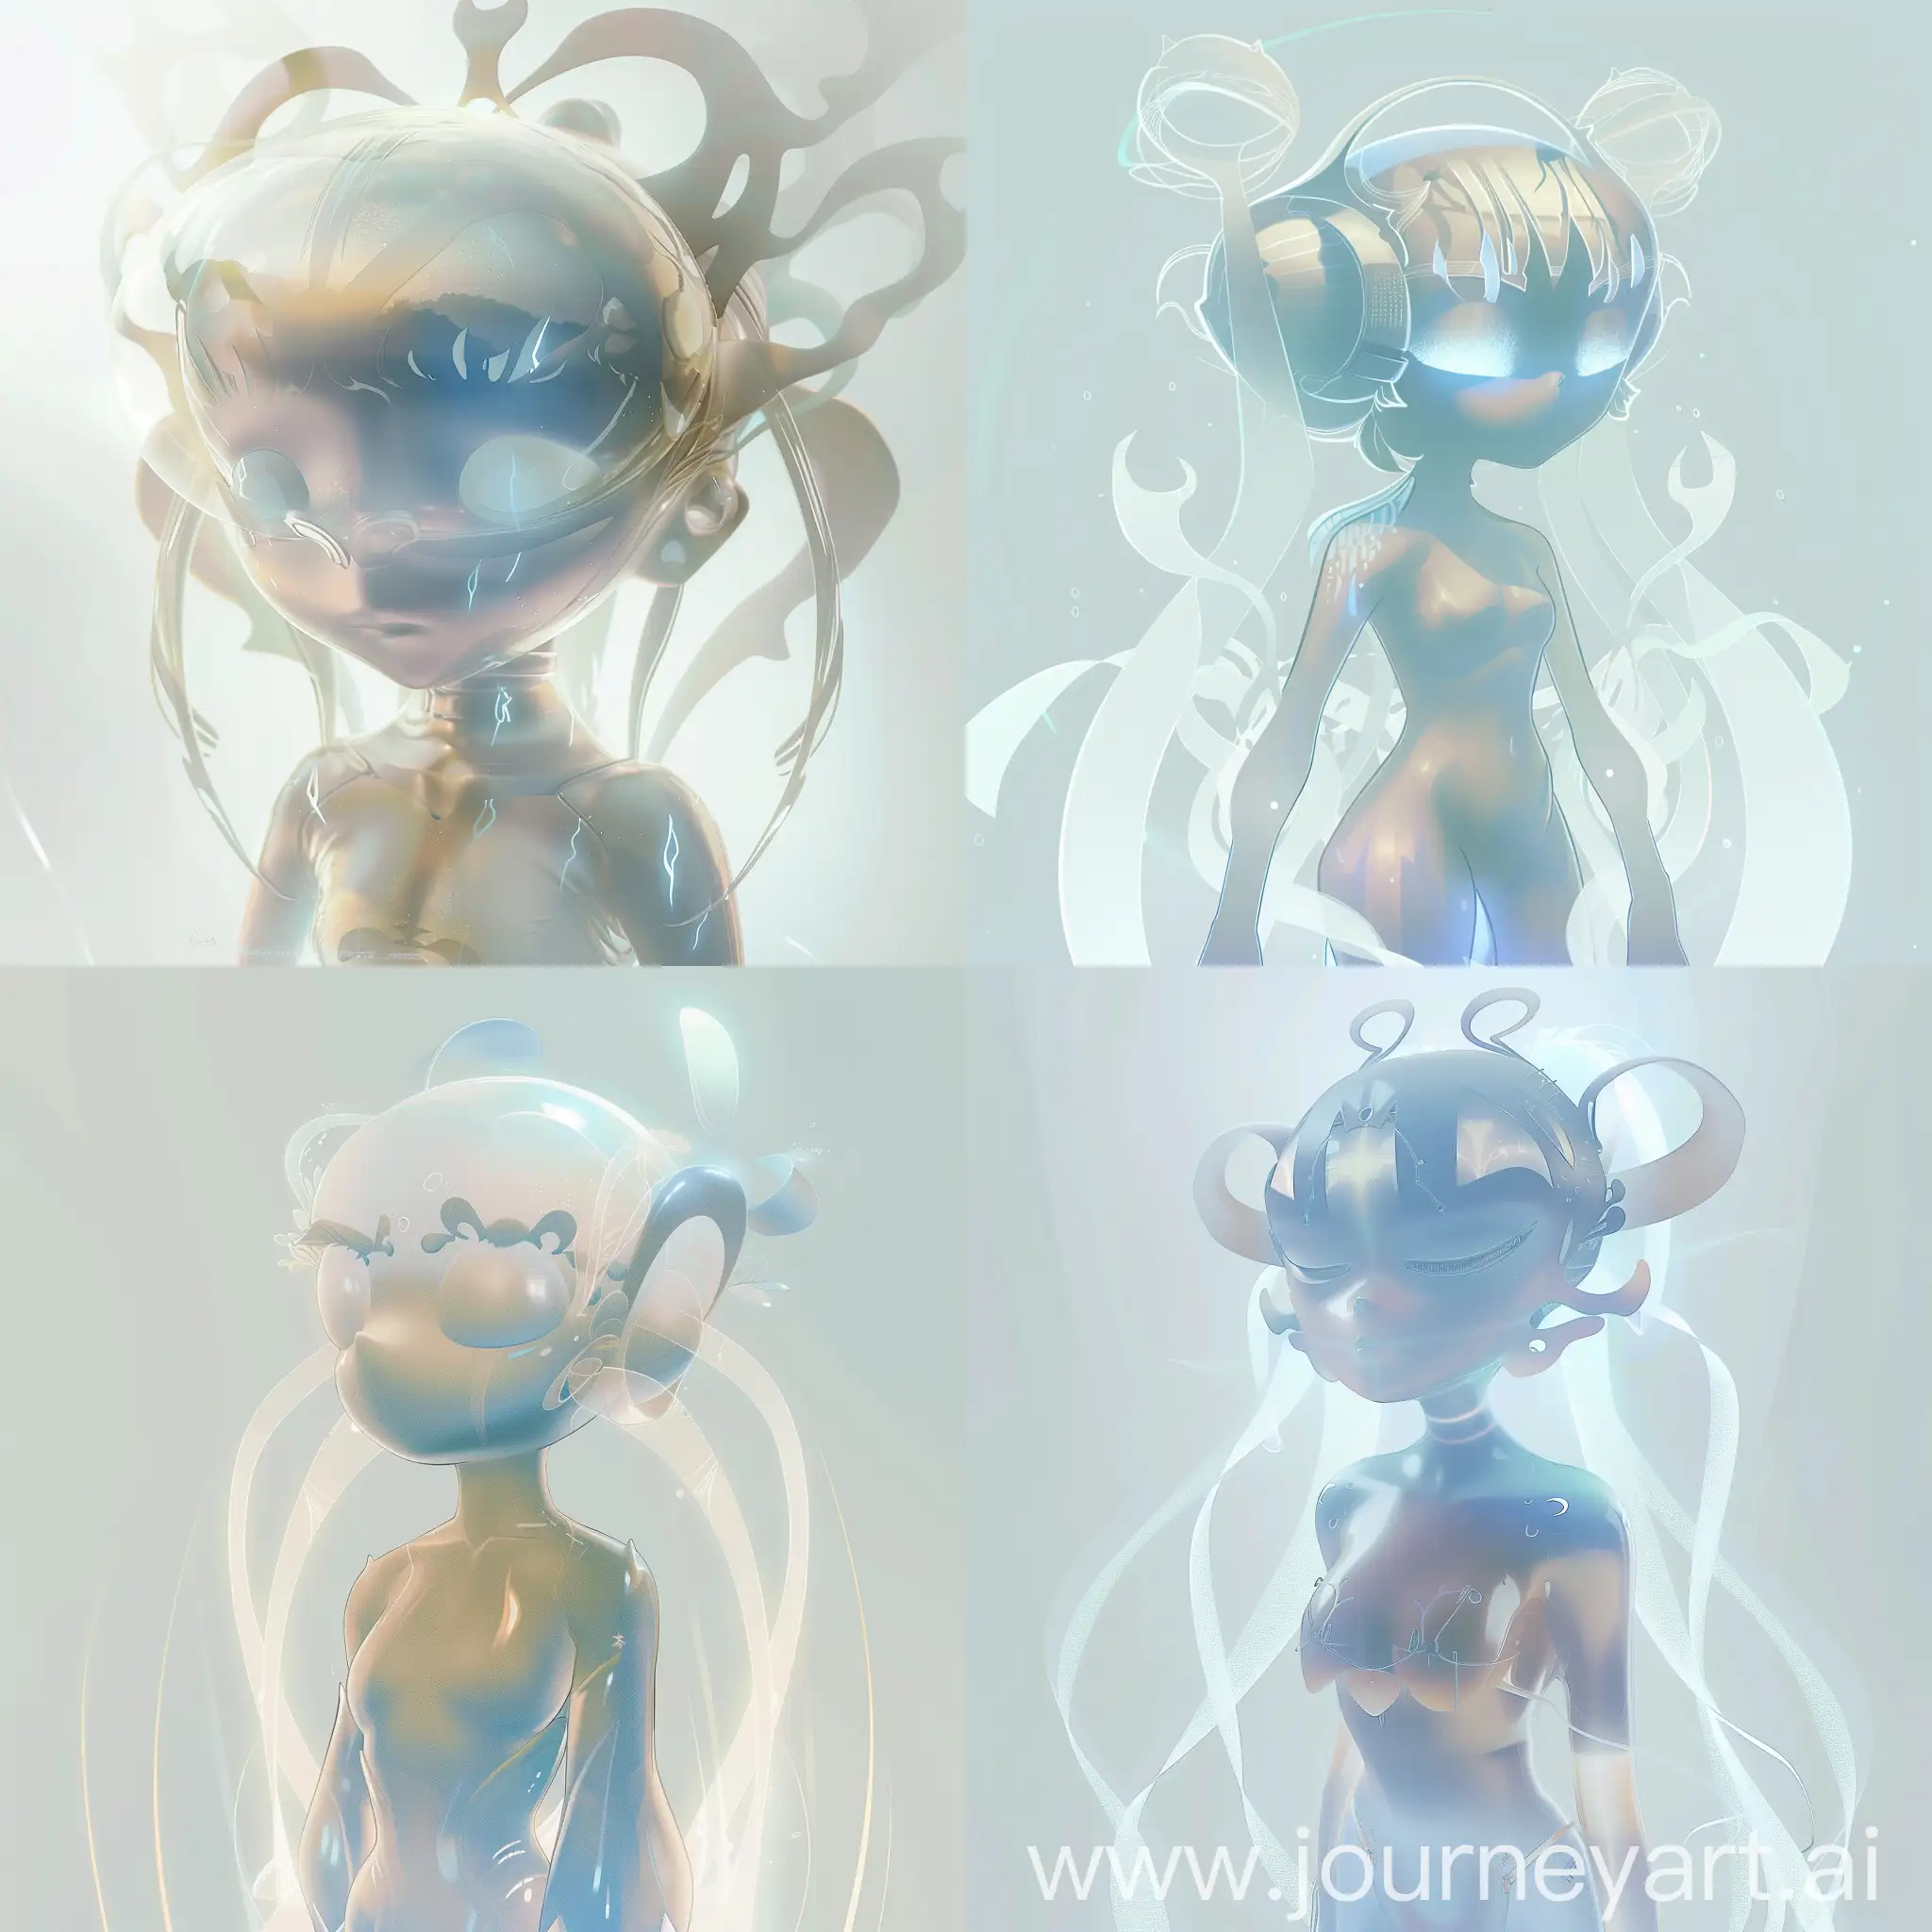 Create an illustration featuring a futuristic, ethereal character with a soft, glowing appearance. The character should have a smooth, metallic surface and delicate, flowing lines that give a sense of otherworldly elegance. Incorporate elements of bioluminescence and a muted color palette, primarily in shades of white, blue, and soft pastels. The design should evoke a feeling of serenity and mystery, with a minimalist background to emphasize the character’s intricate details and luminous quality.